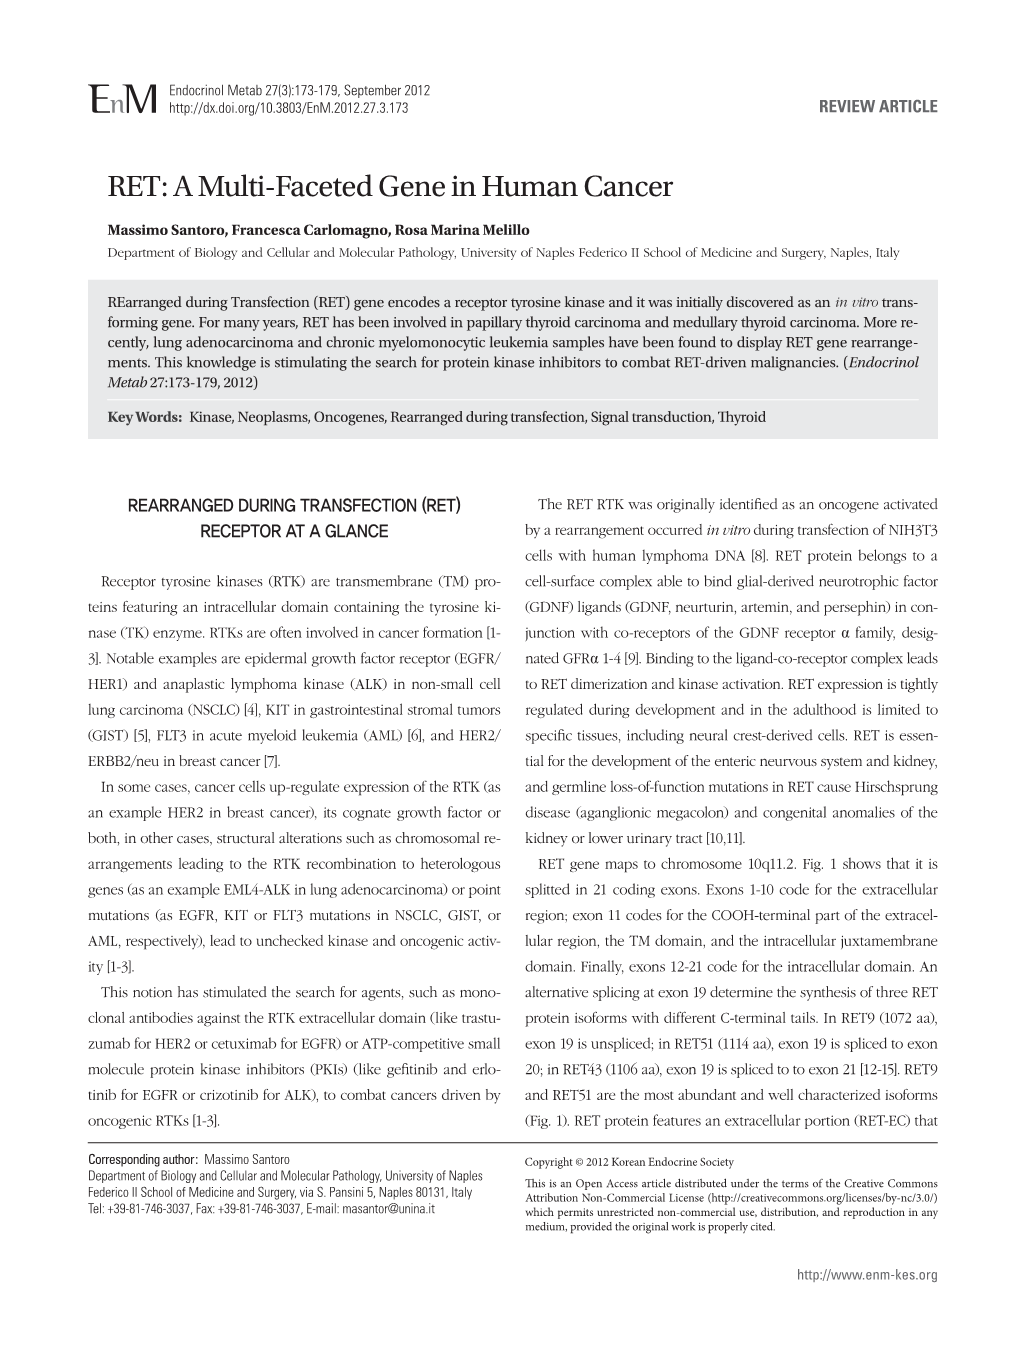 RET: a Multi-Faceted Gene in Human Cancer